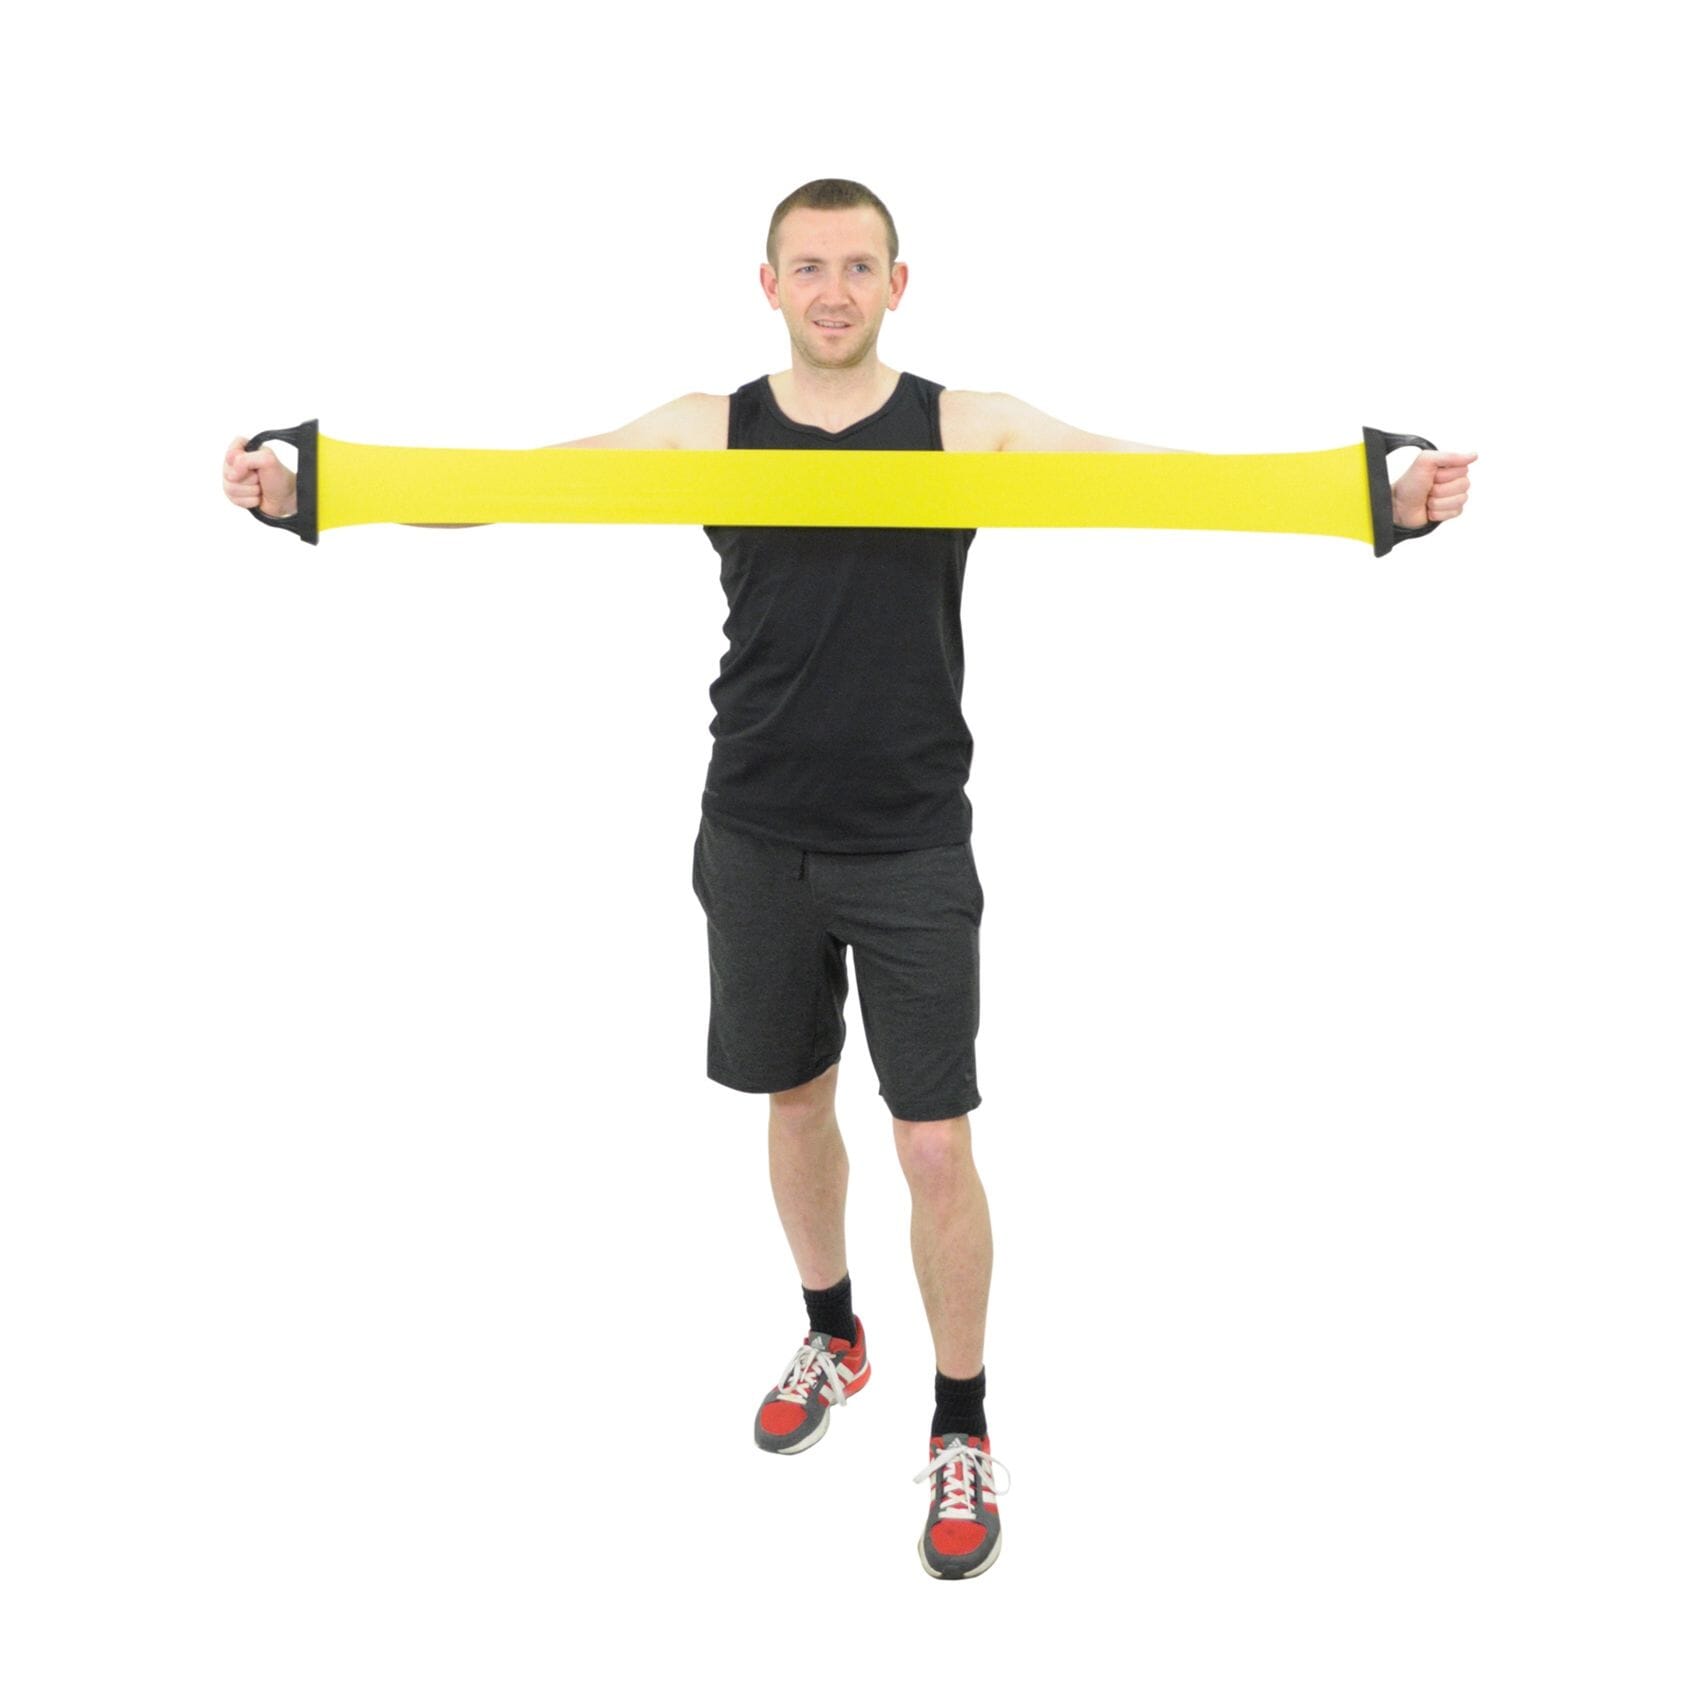 View Aidapt Resistance Exercise Band information